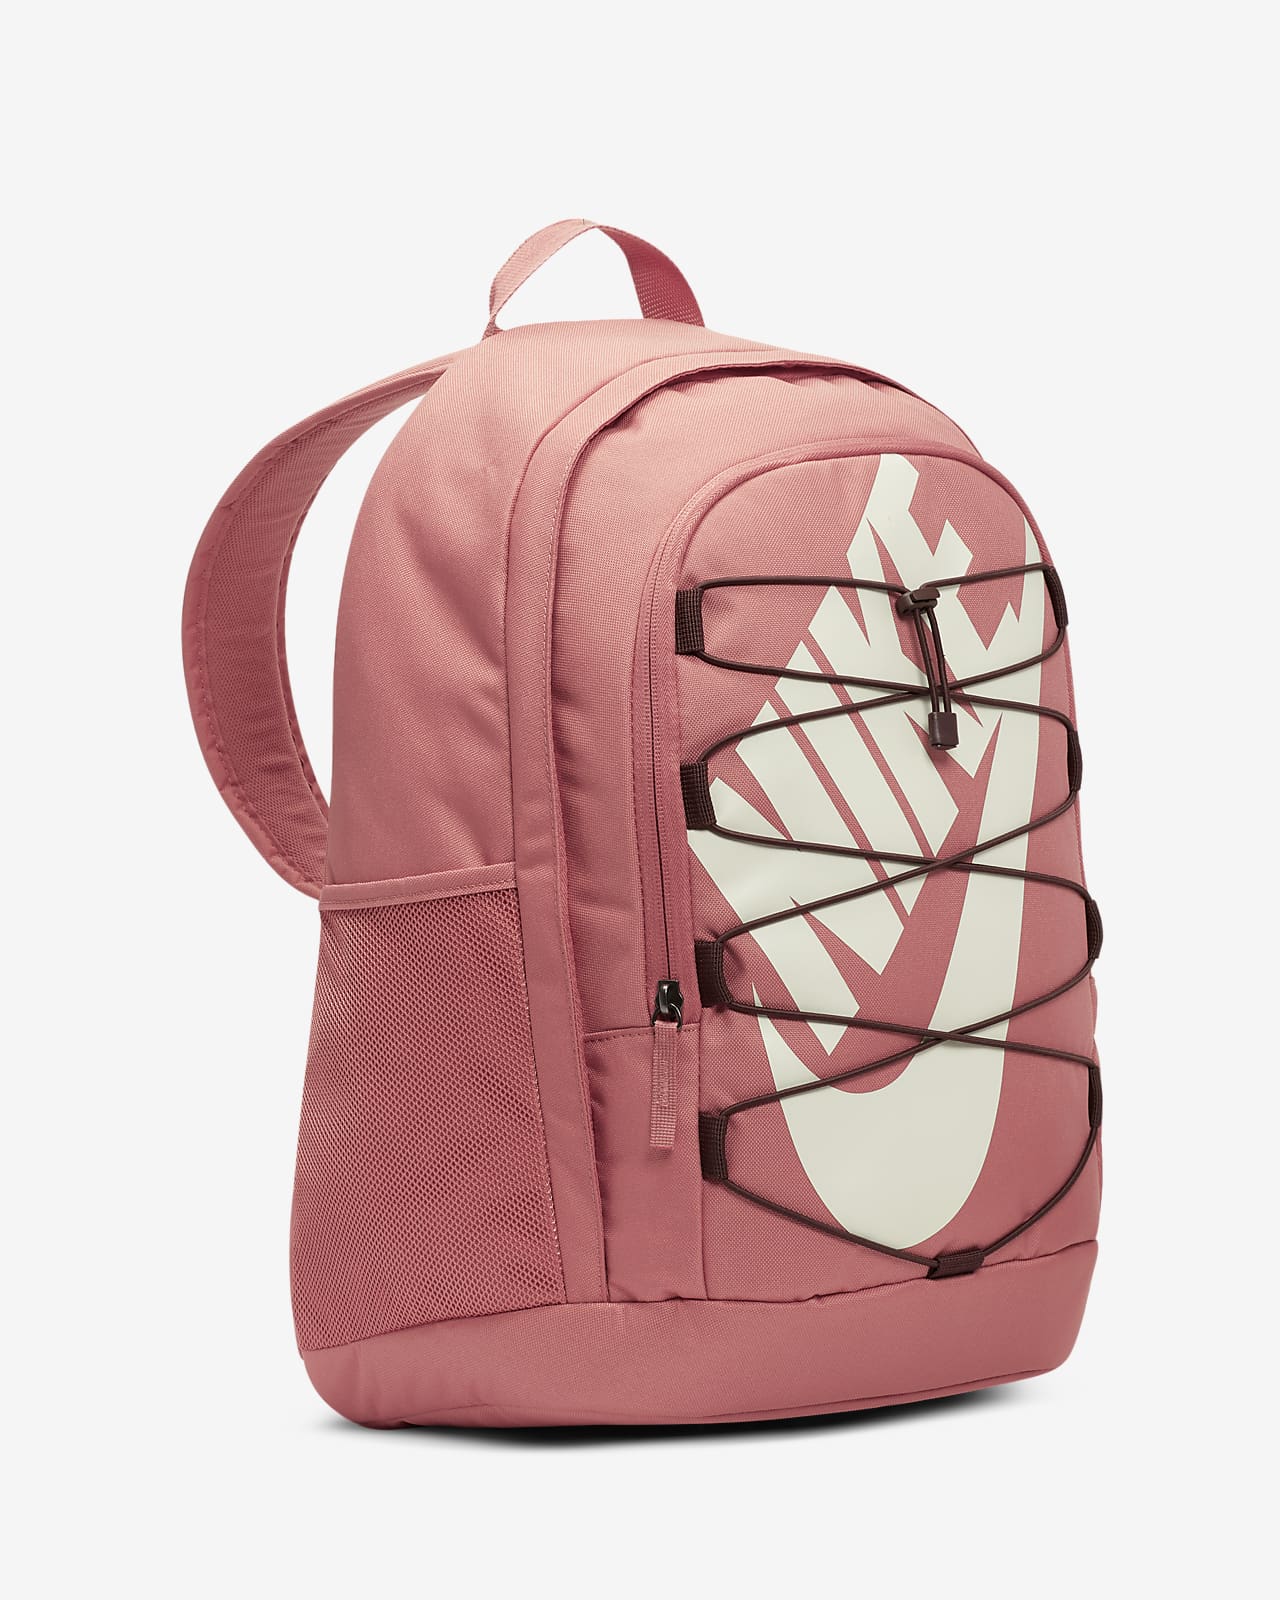 pink and grey nike backpack